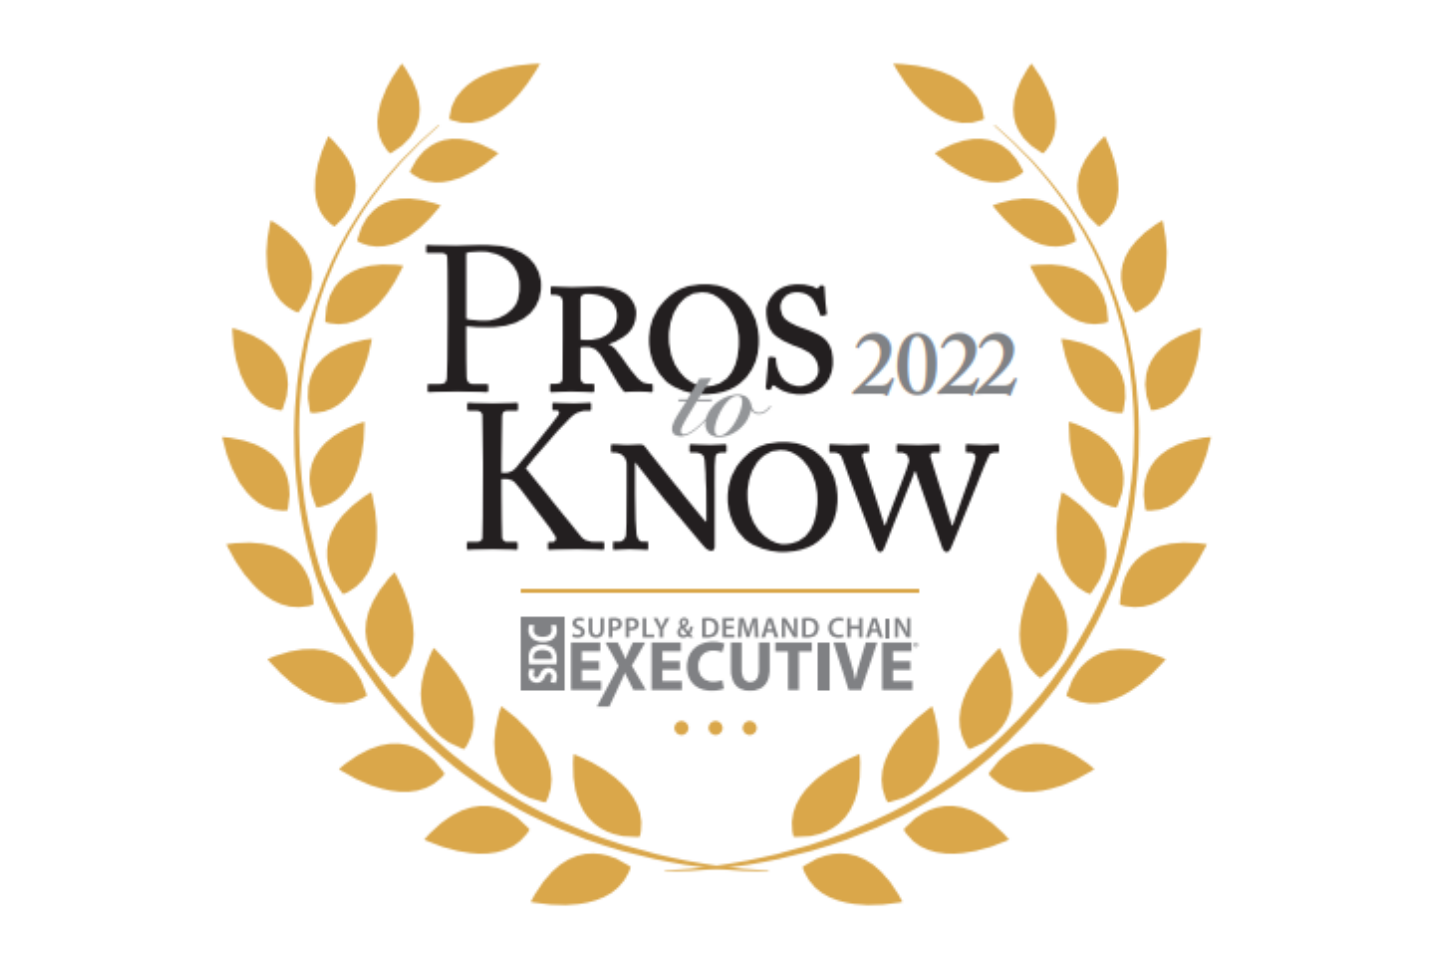 Brian Glick Named 2022 Pro to Know by Supply & Demand Chain Executive